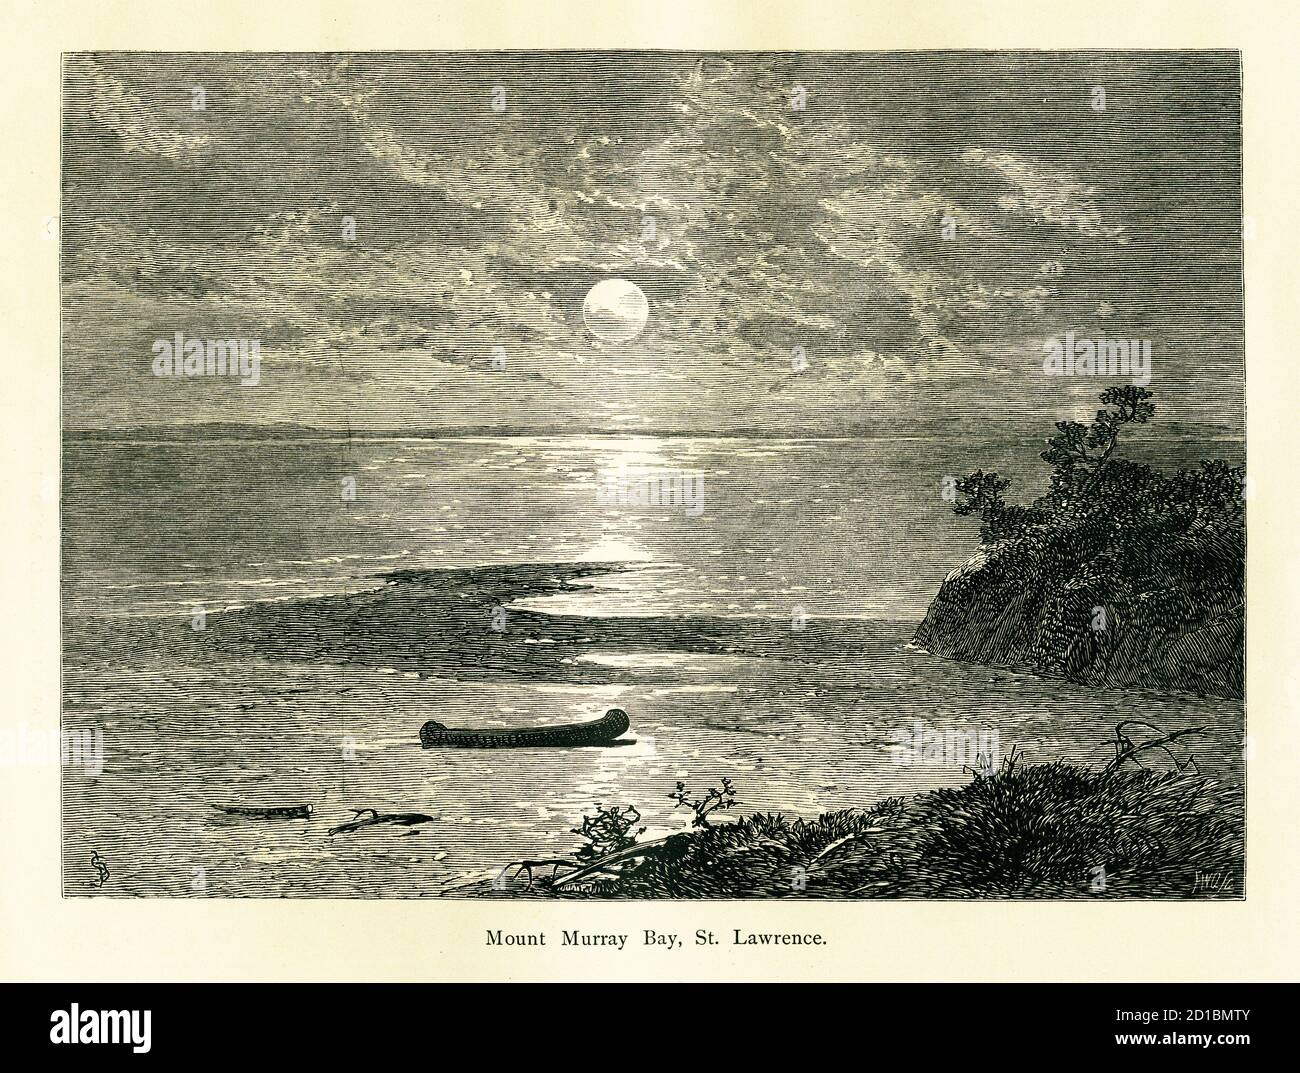 Antique engraving of Murray Bay, Saint Lawrence River, Canada. Illustration published in Picturesque America or the Land We Live In (D. Appleton & Co. Stock Photo